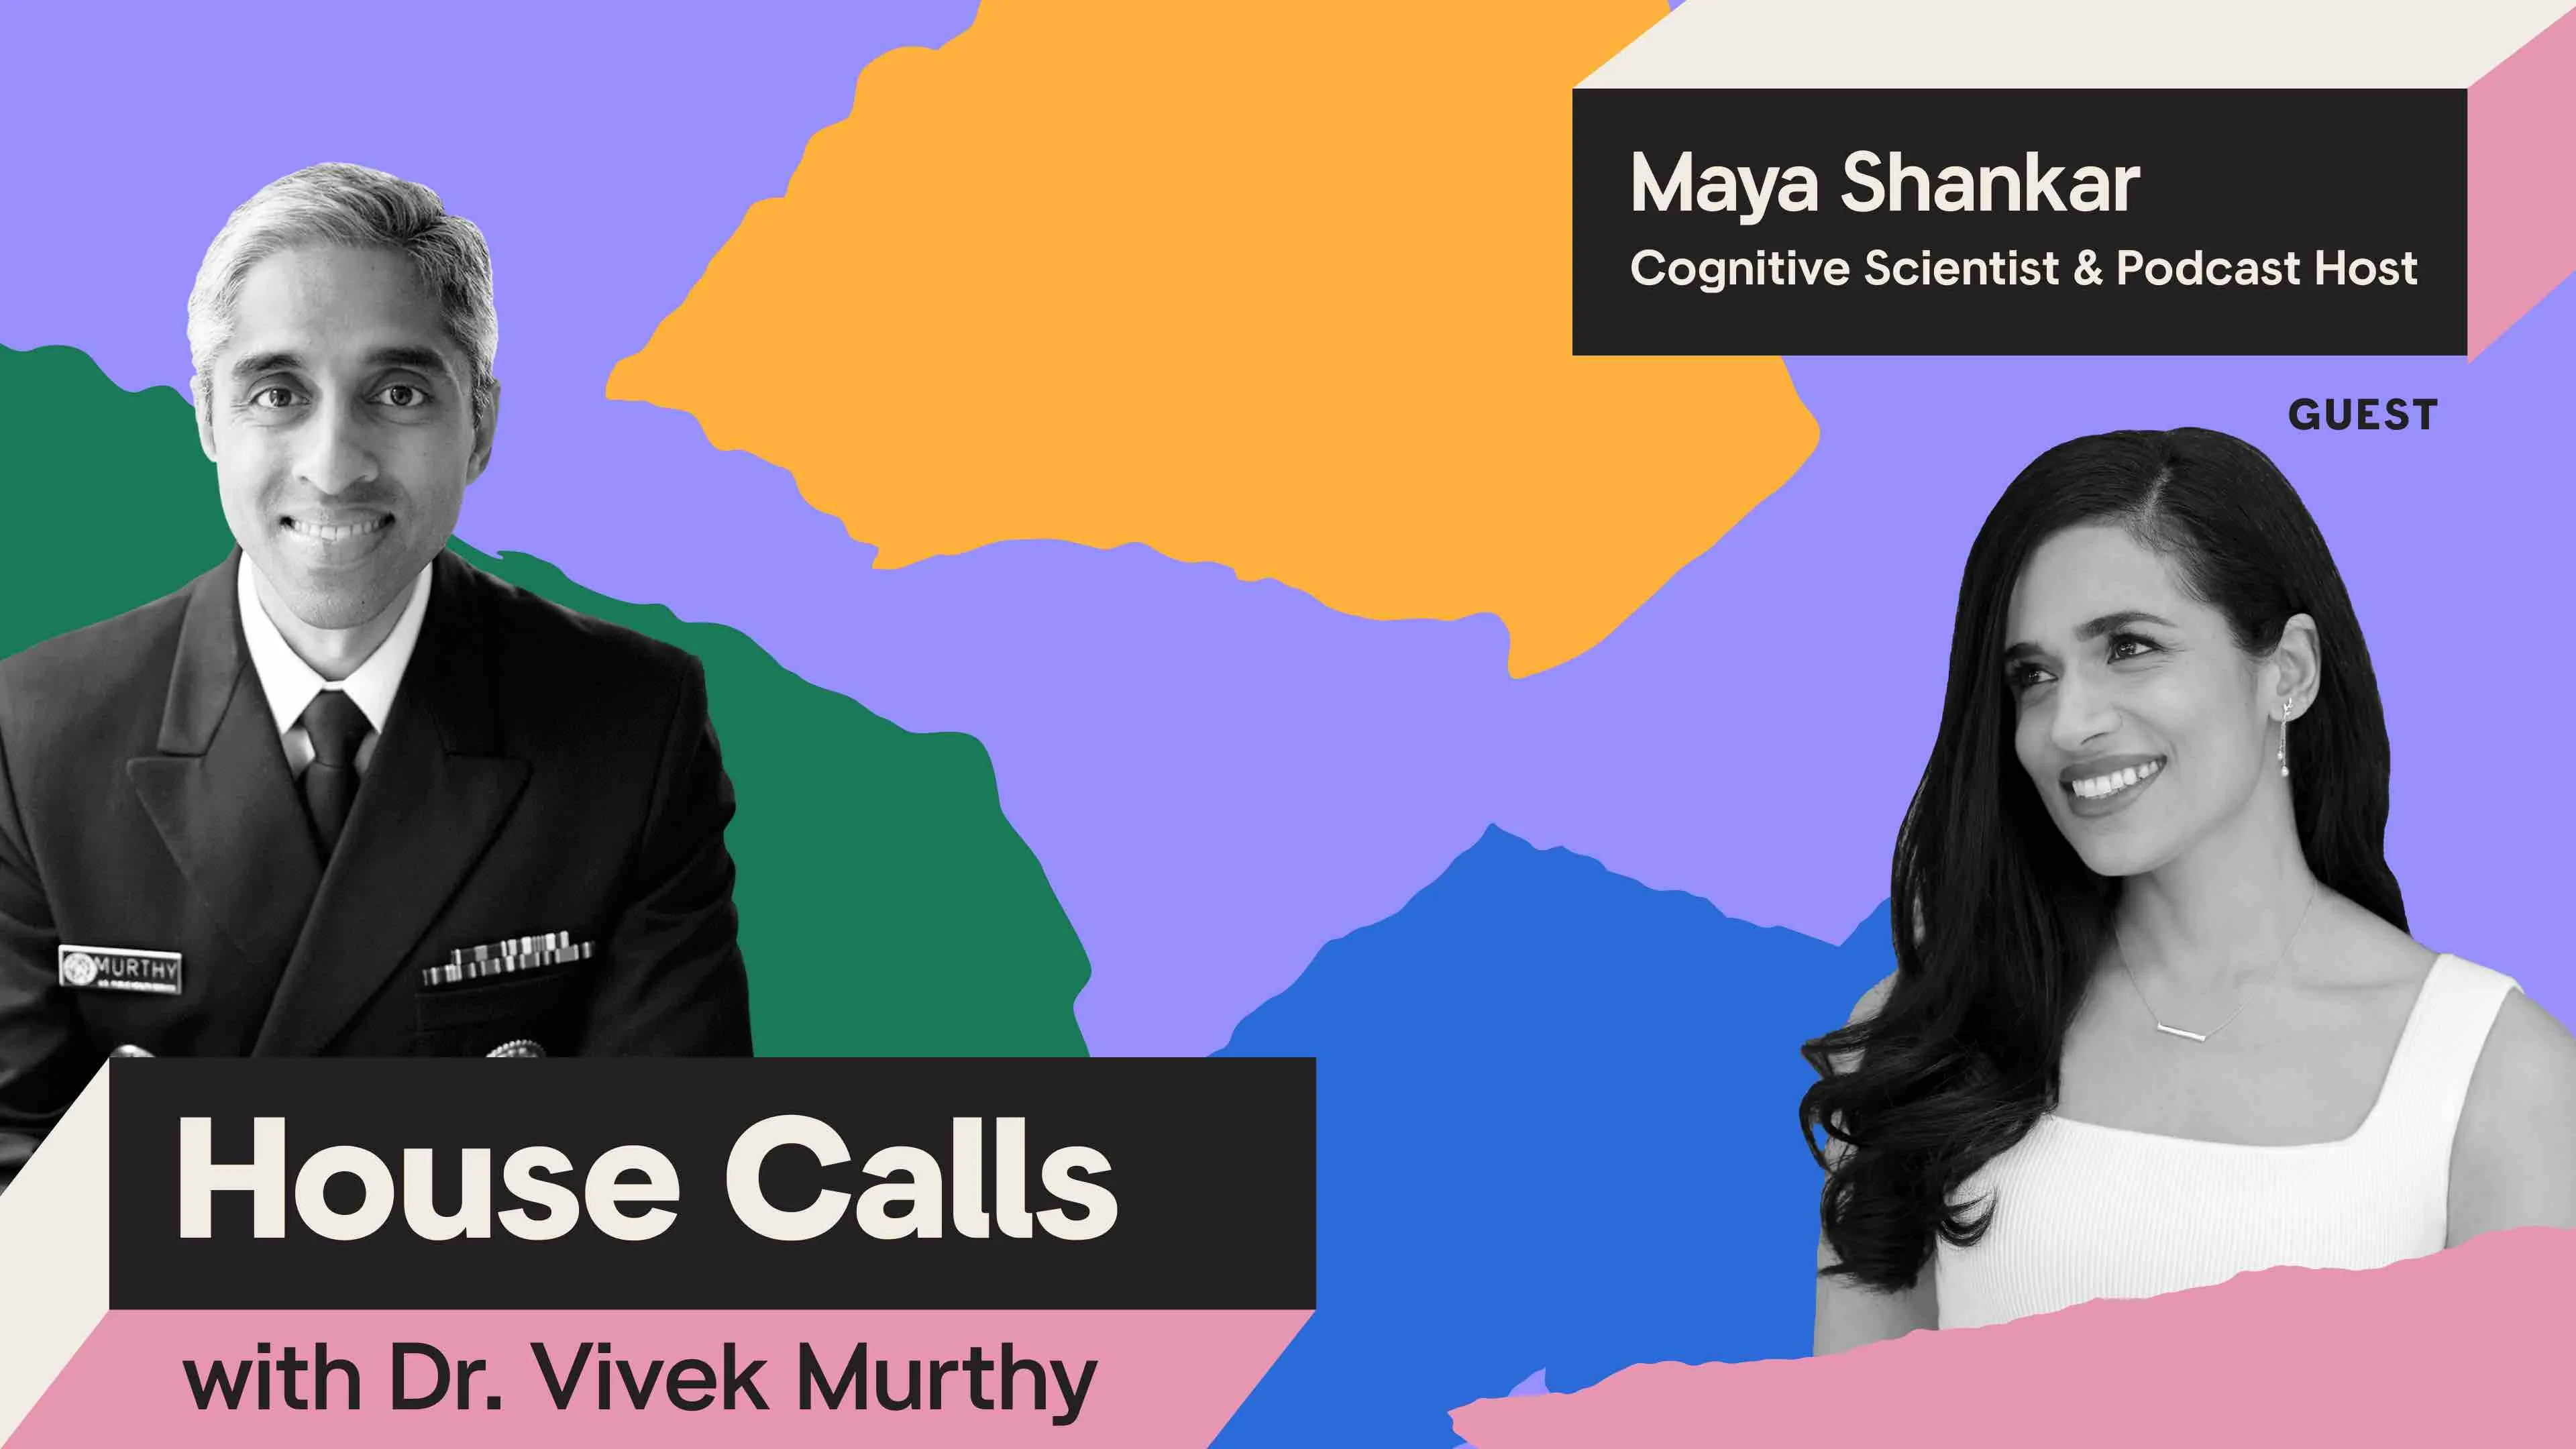 Black and white portraits of Surgeon General Vivek Murthy and Maya Shankar with a colorful background.